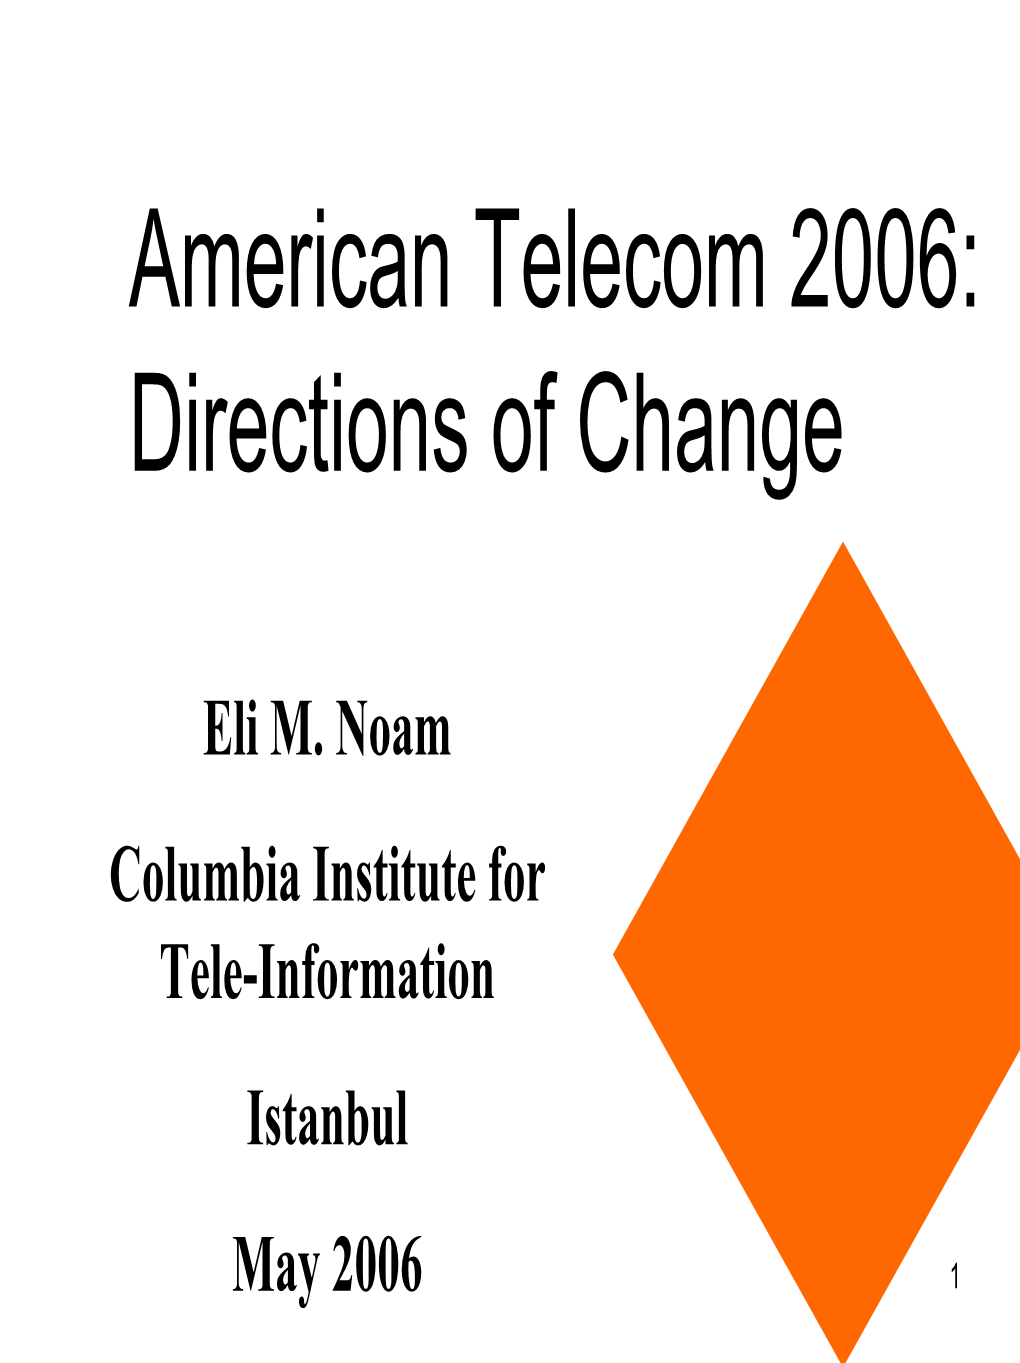 American Telecom 2006: Directions of Change